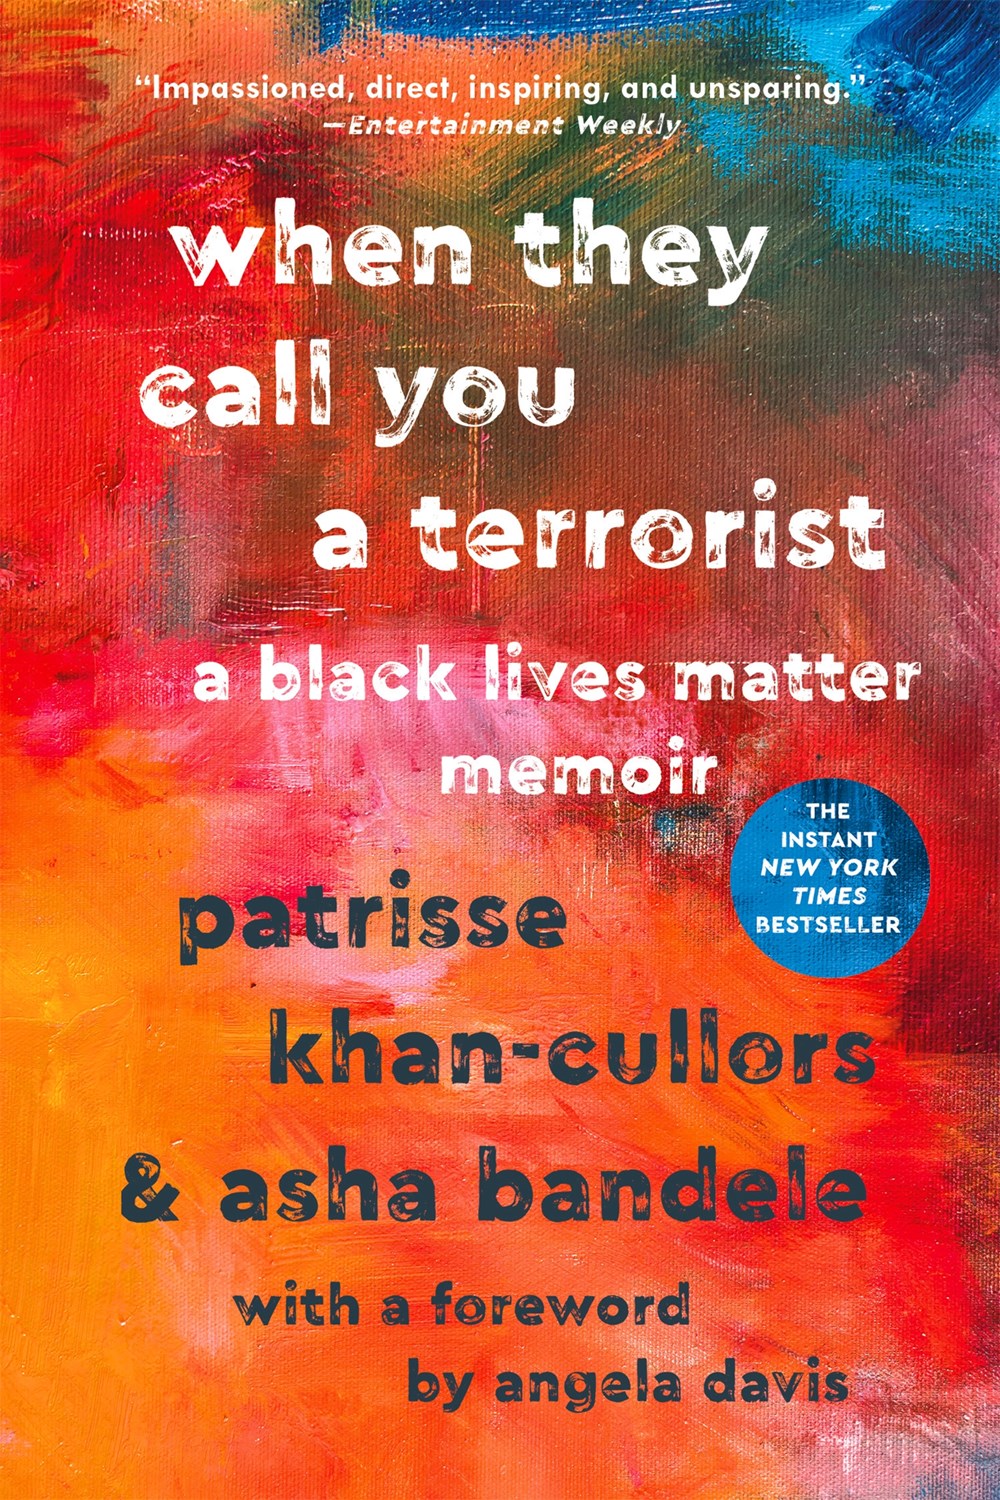 When They Call You A Terrorist by Patrisse Khan-Cullors & Asha Bandele